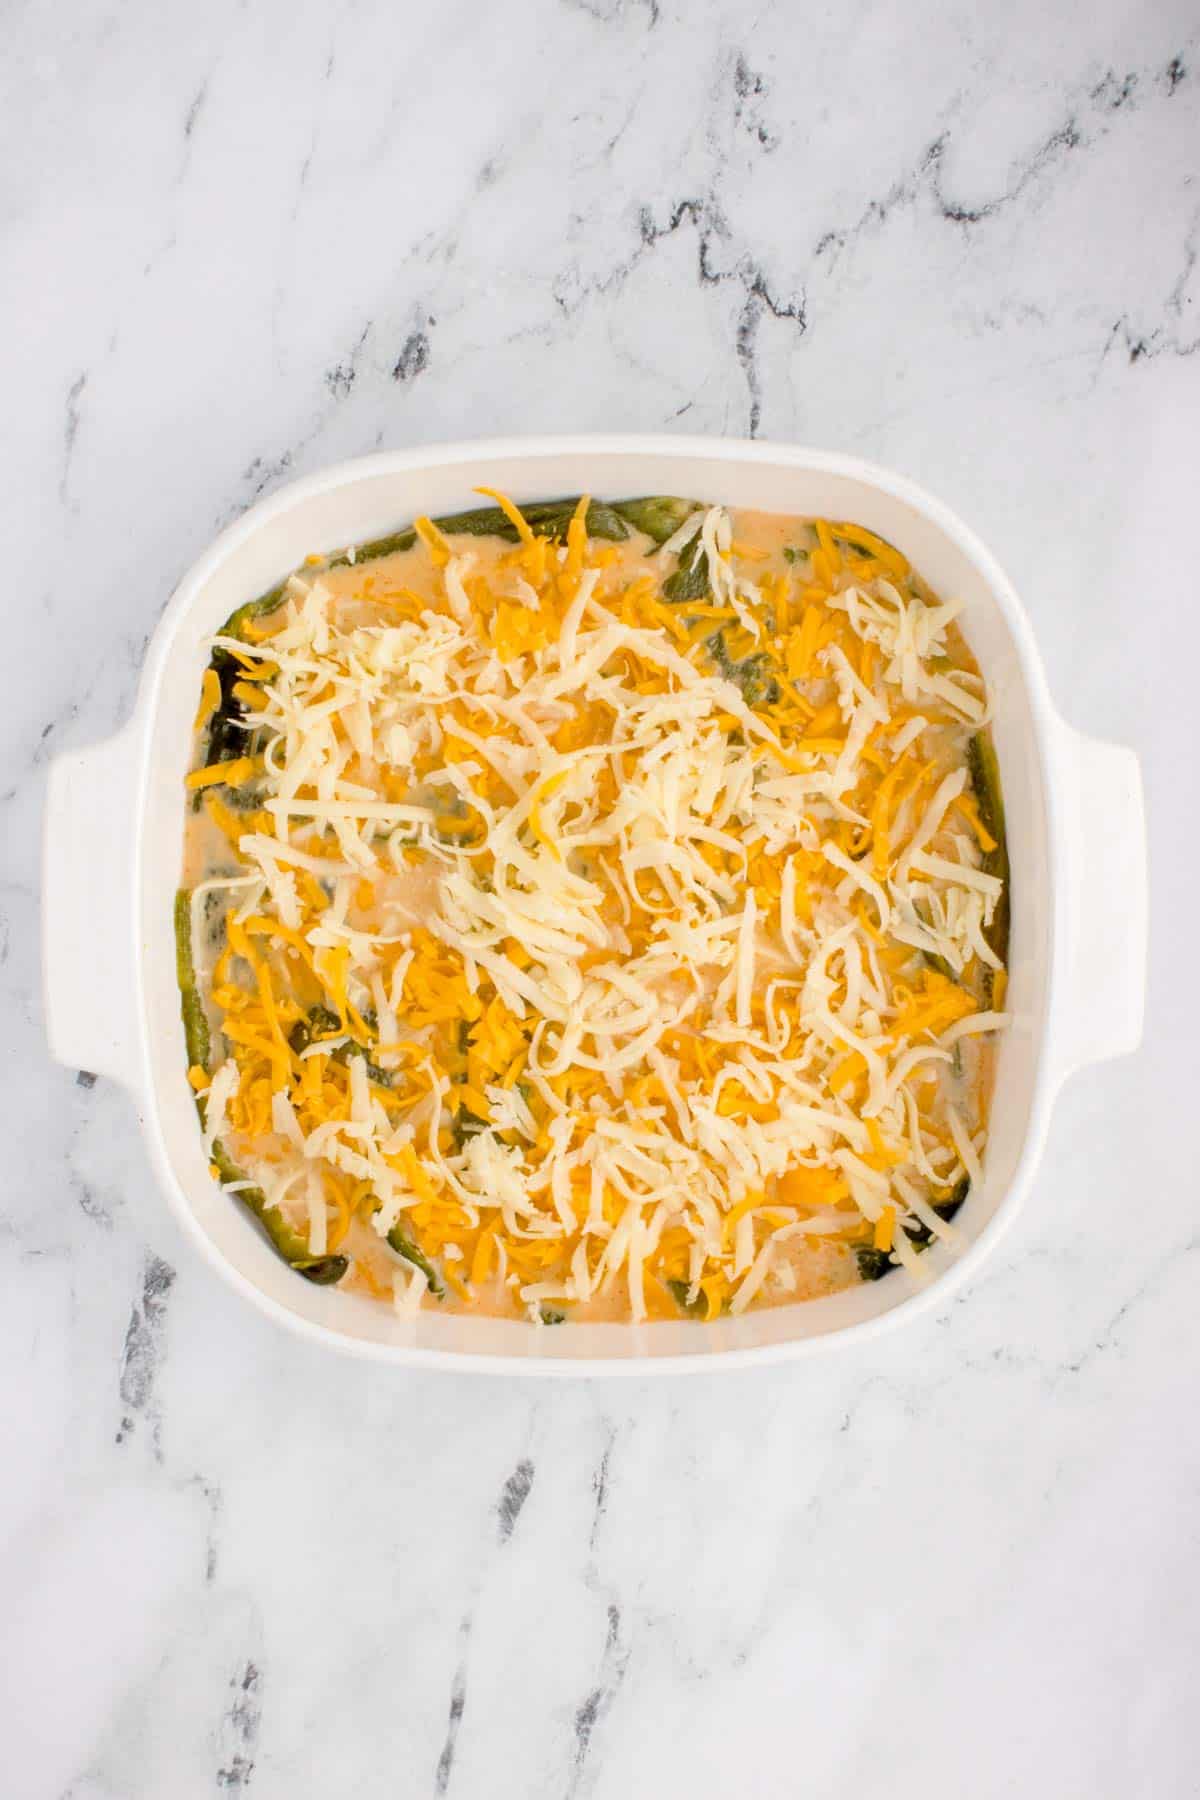 shredded cheese on top of egg batter in a baking dish